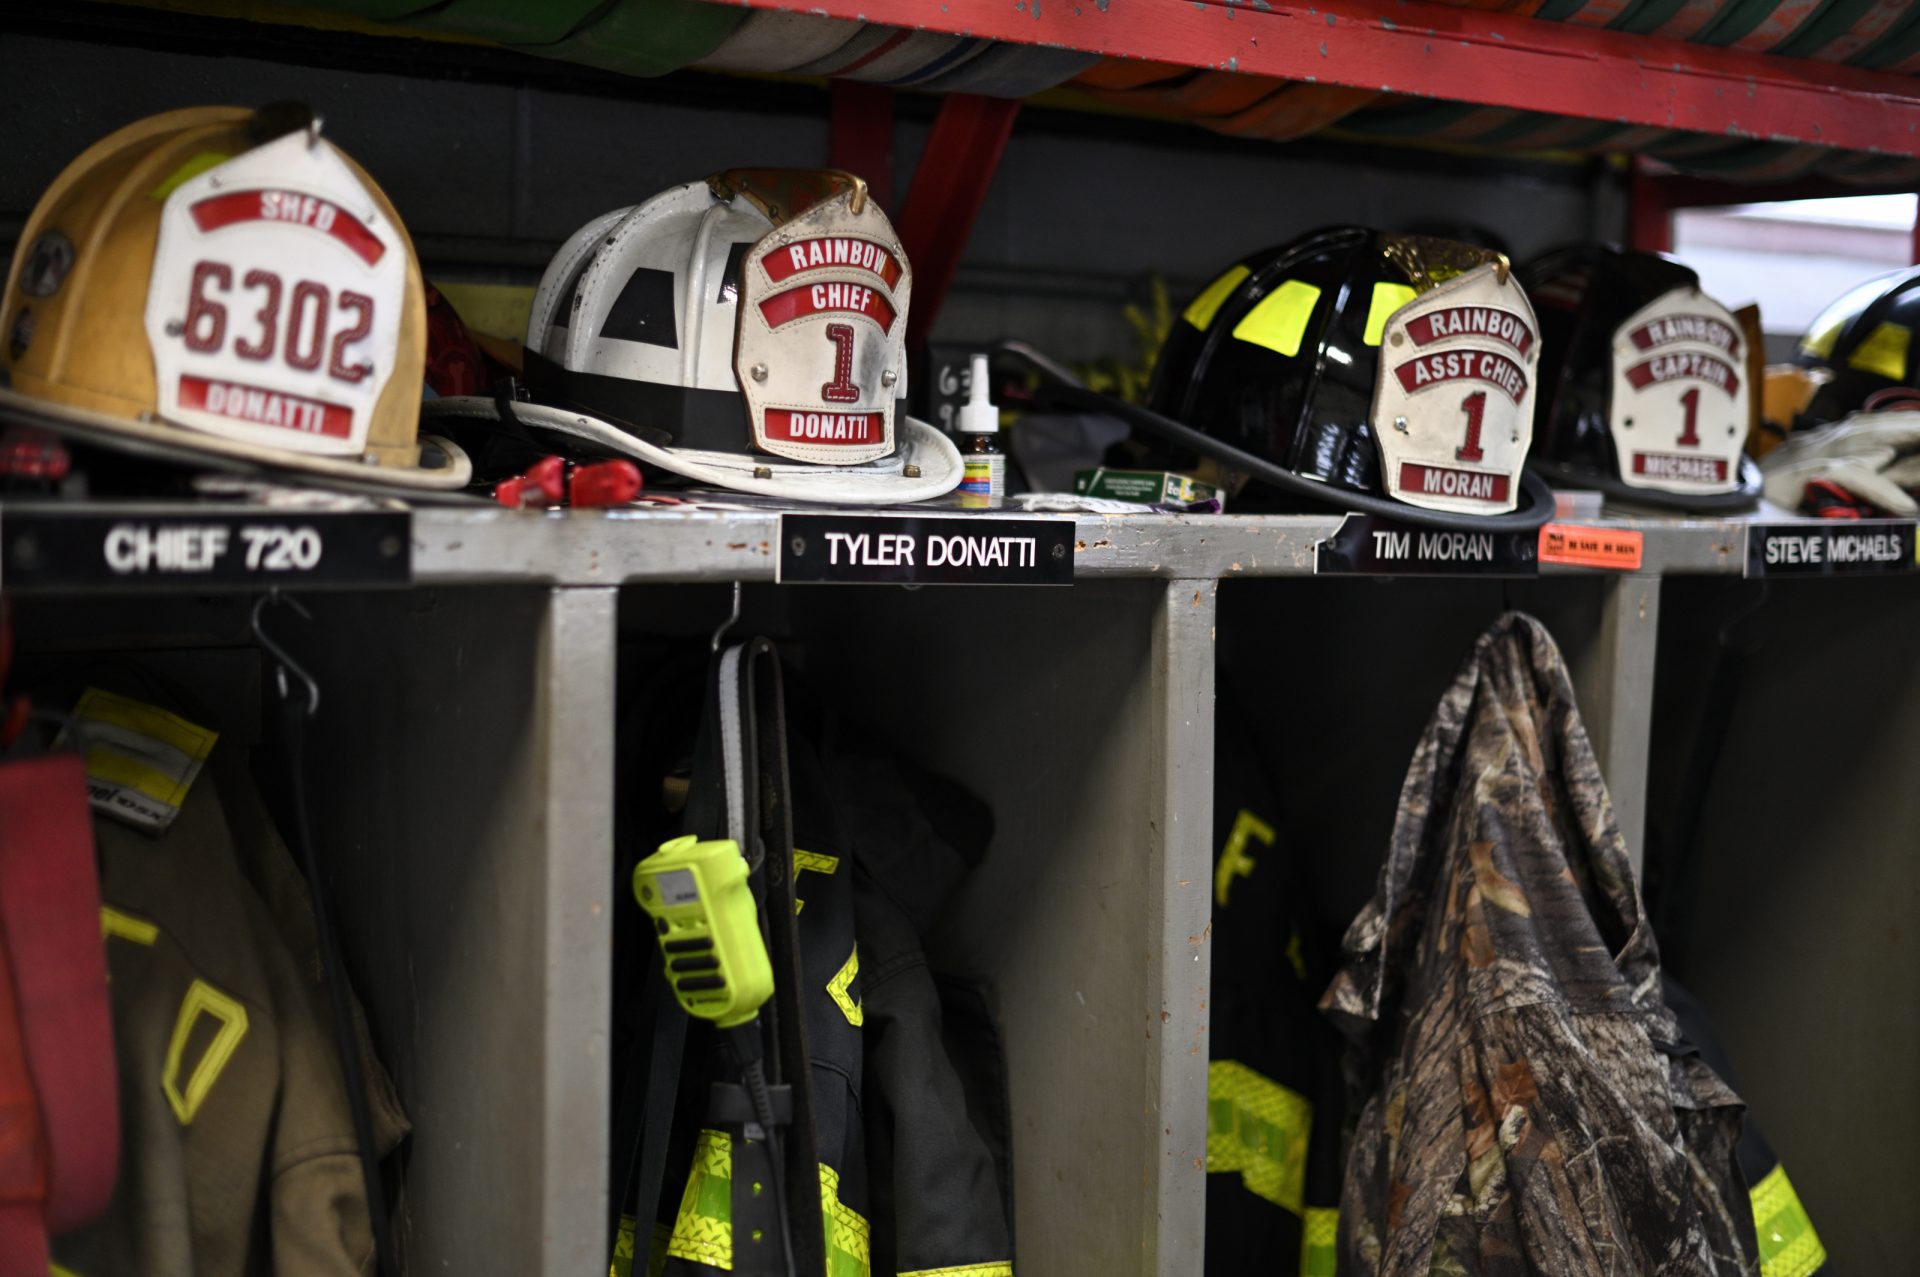 Helmets of volunteer firefighters at the fire house of the Rainbow Hose Co., in Schuylkill Haven, PA, on December 15, 2019.